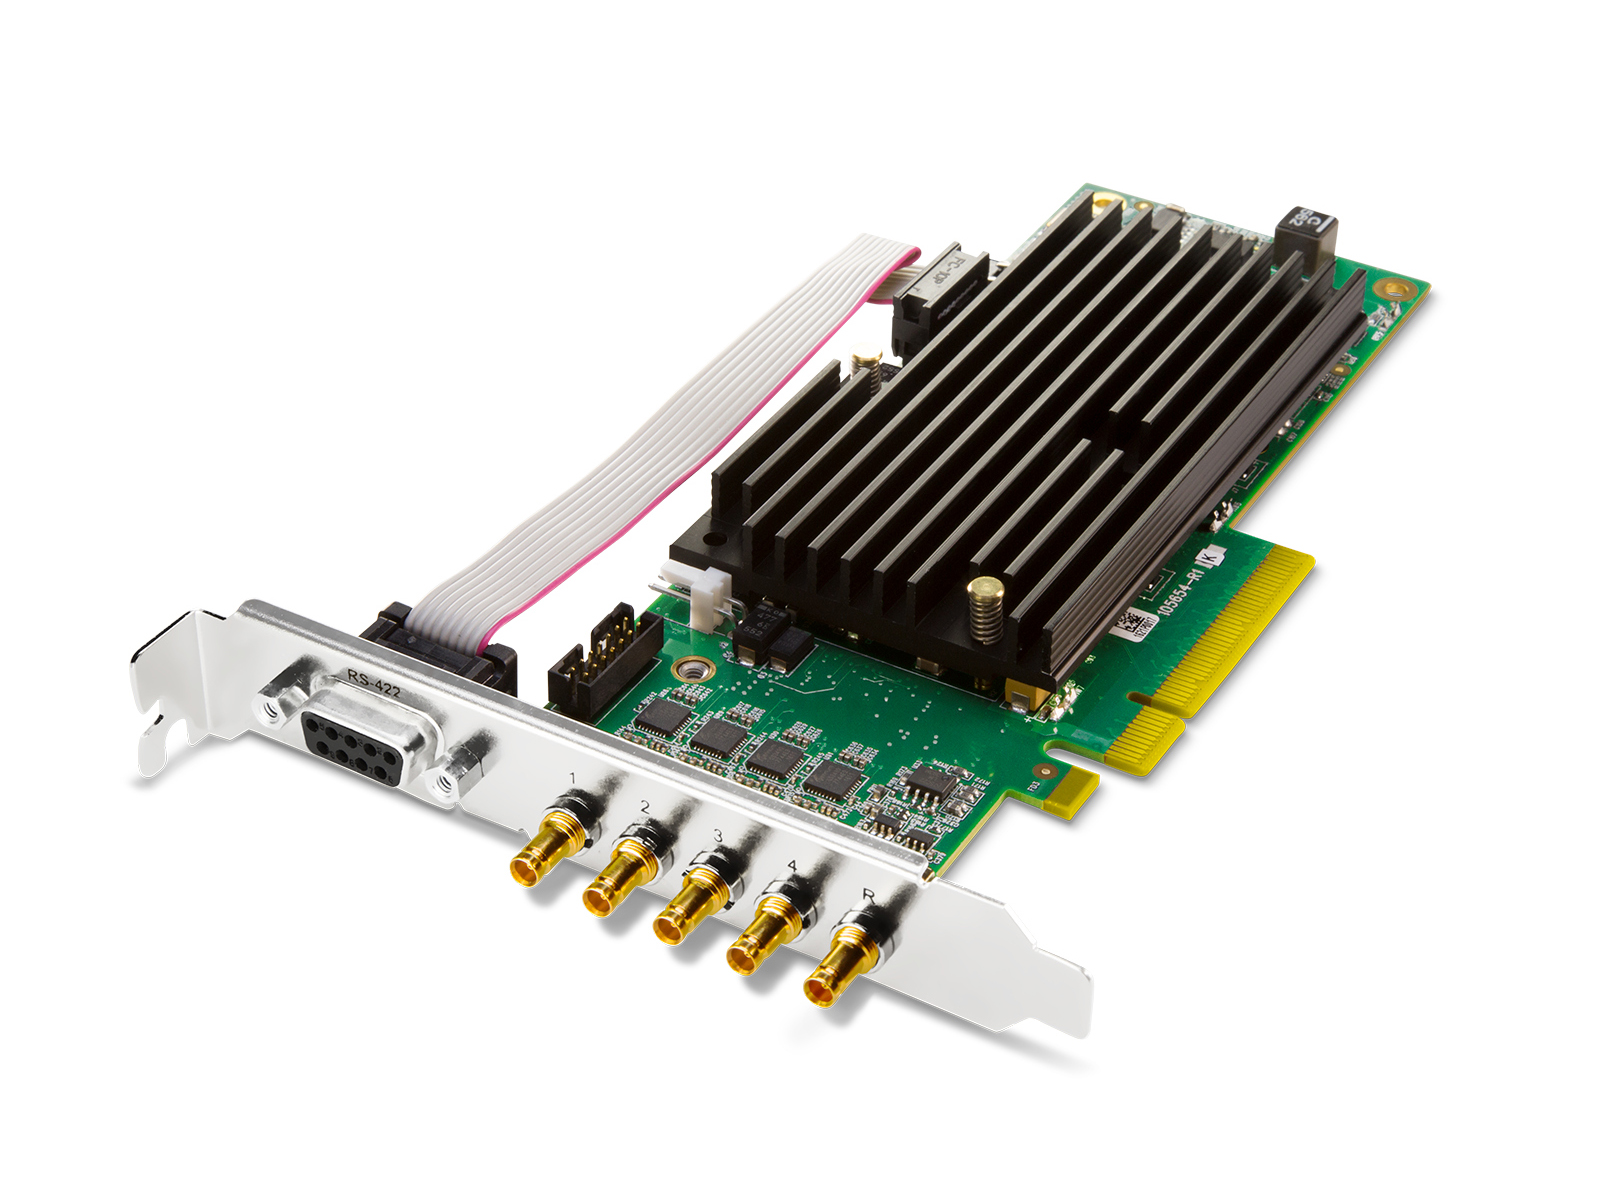 CRV44-BNC-NF 8-lane PCIe 2.0 Flexible Multi-format I/O Card with full size BNC and Passive Heat Sink by AJA